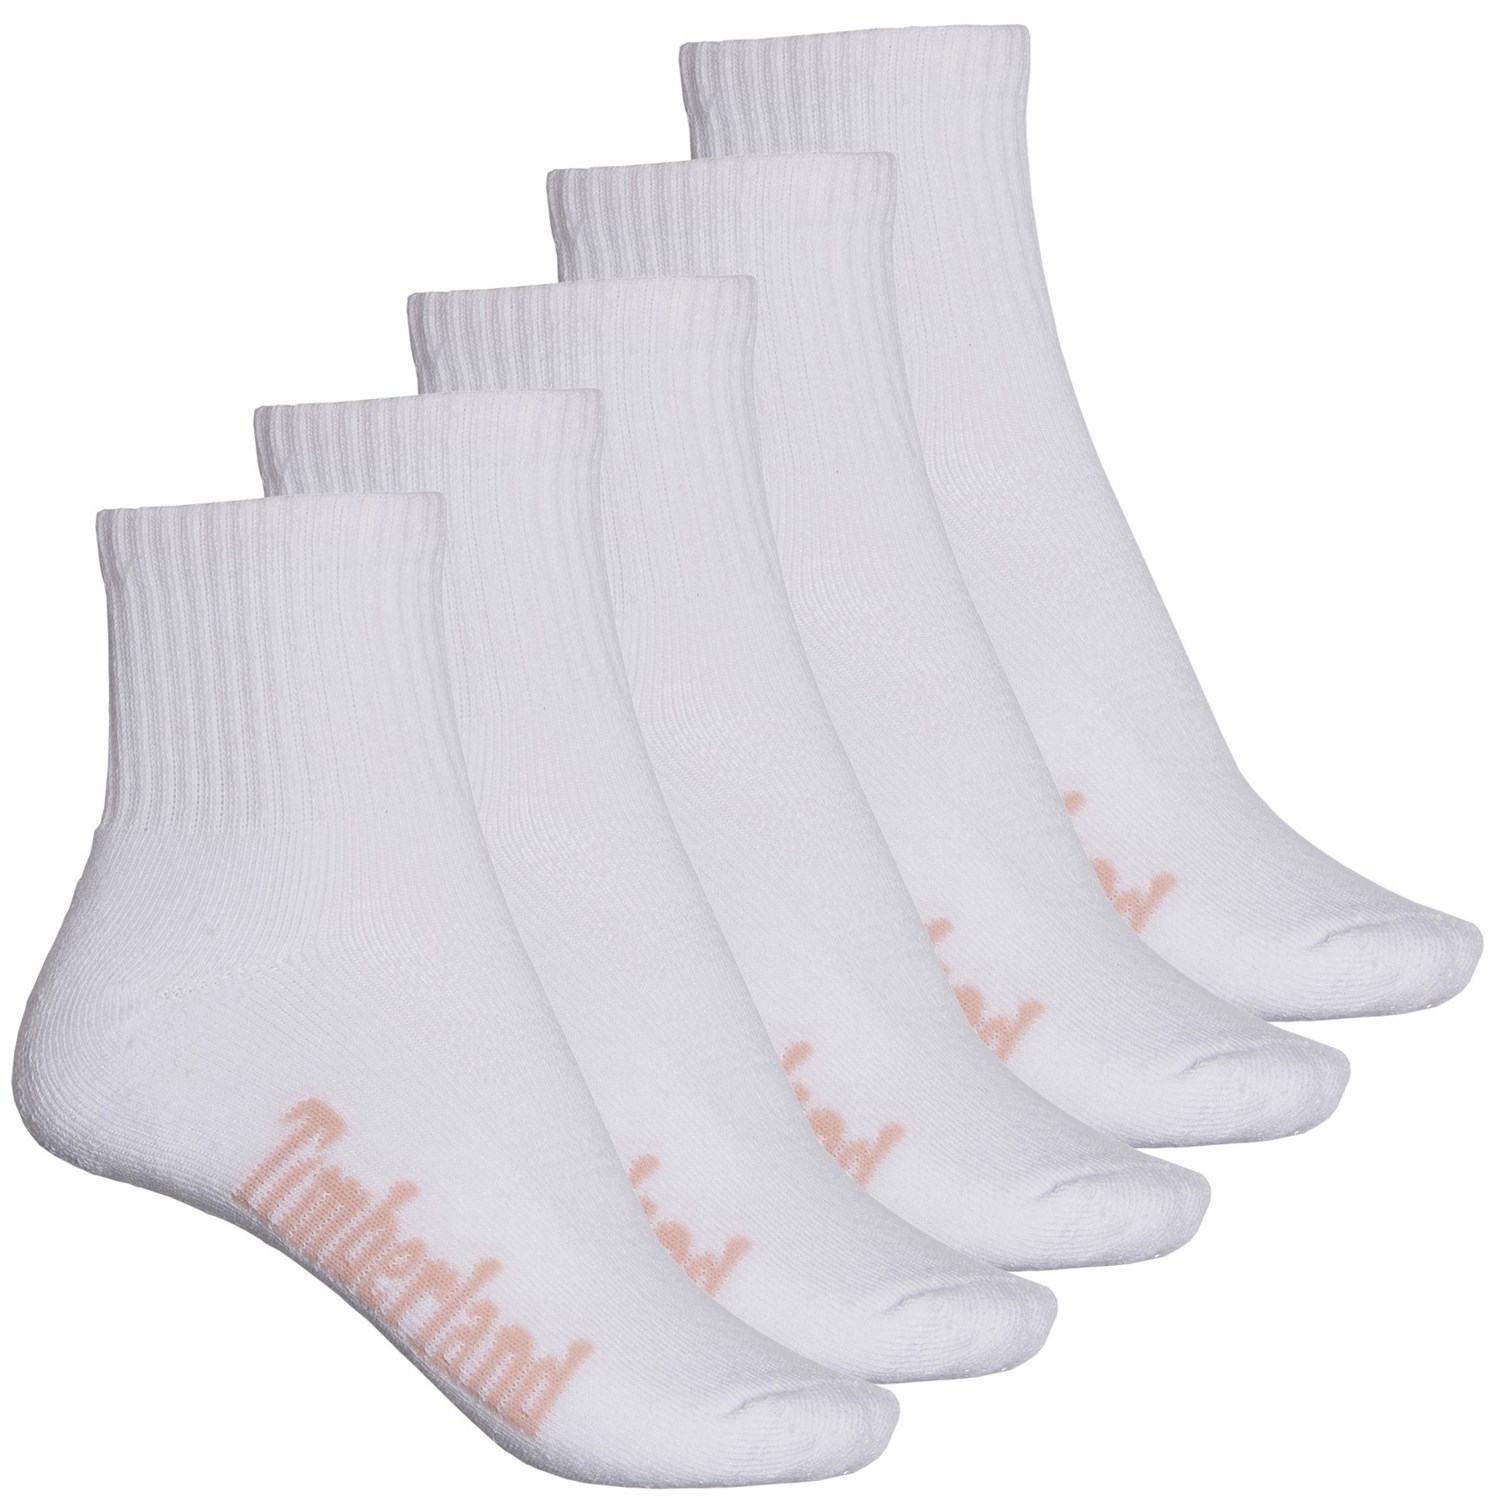 Timberland Venting Socks (For Women) - Save 33%